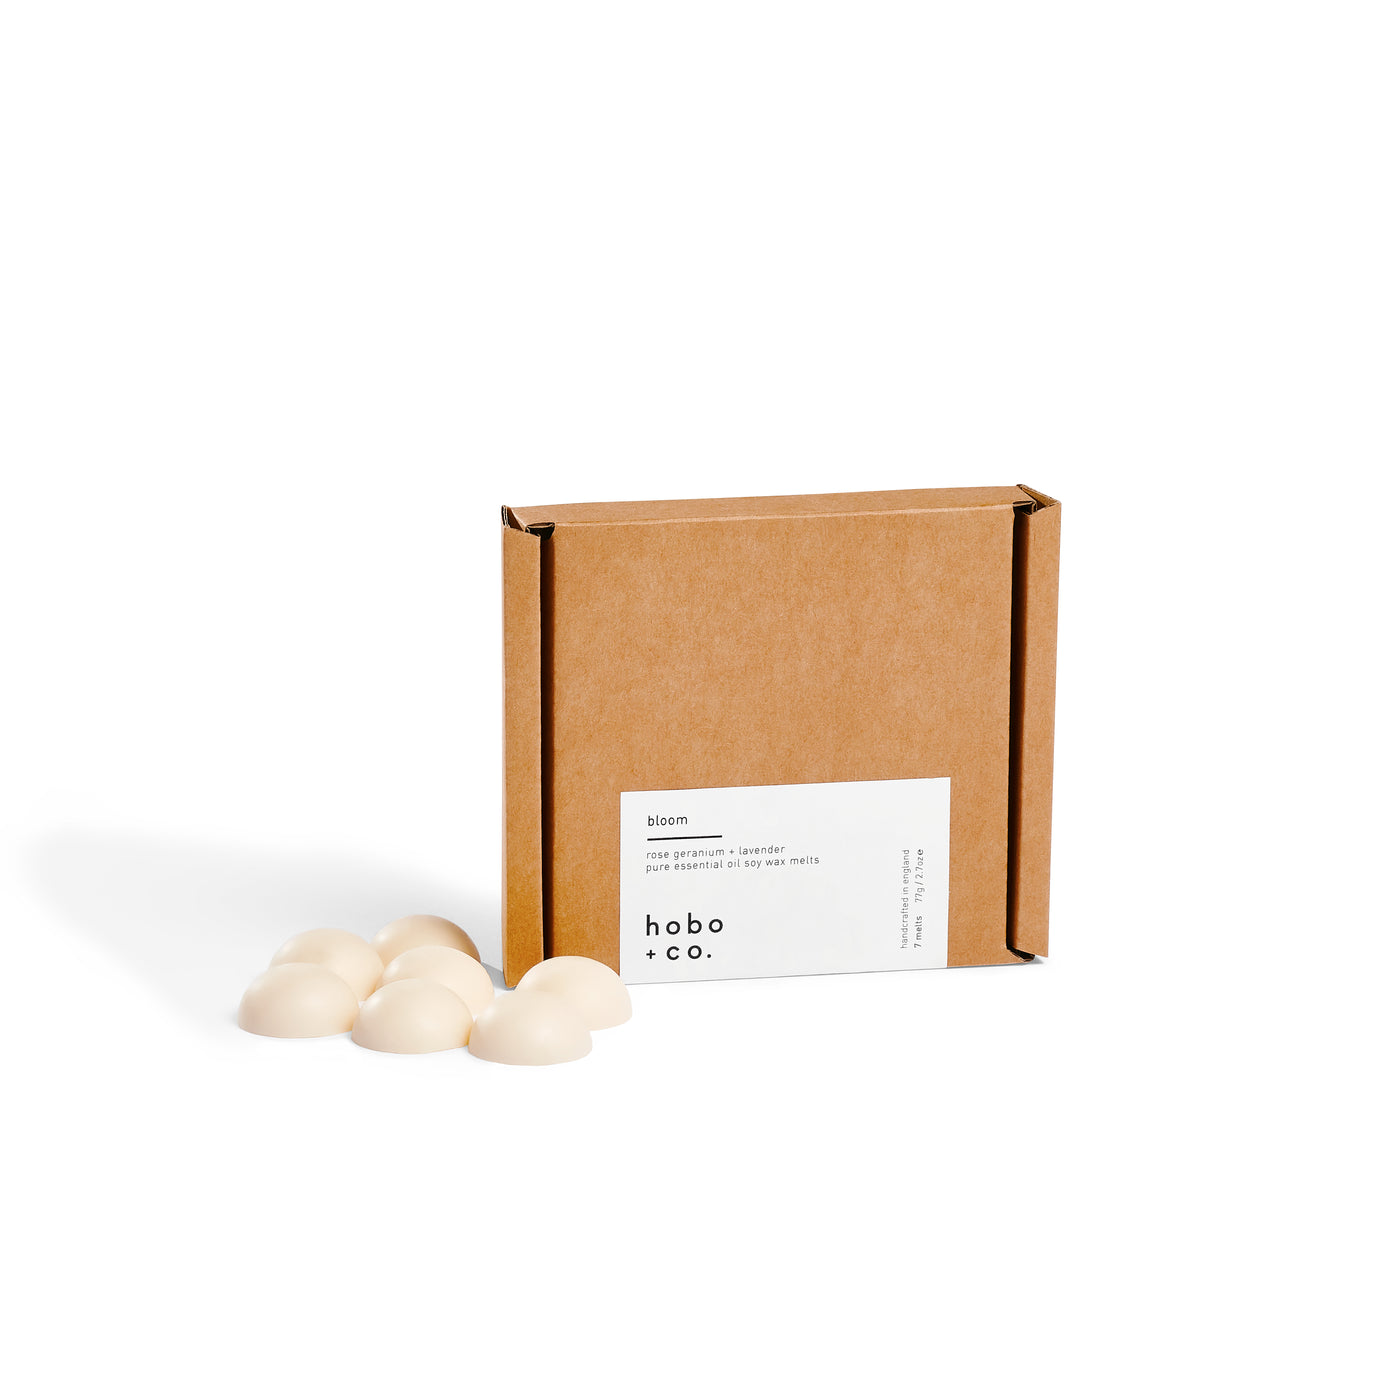 Hobo + Co Bloom Aromatherapy Essential Oil Wax Melts